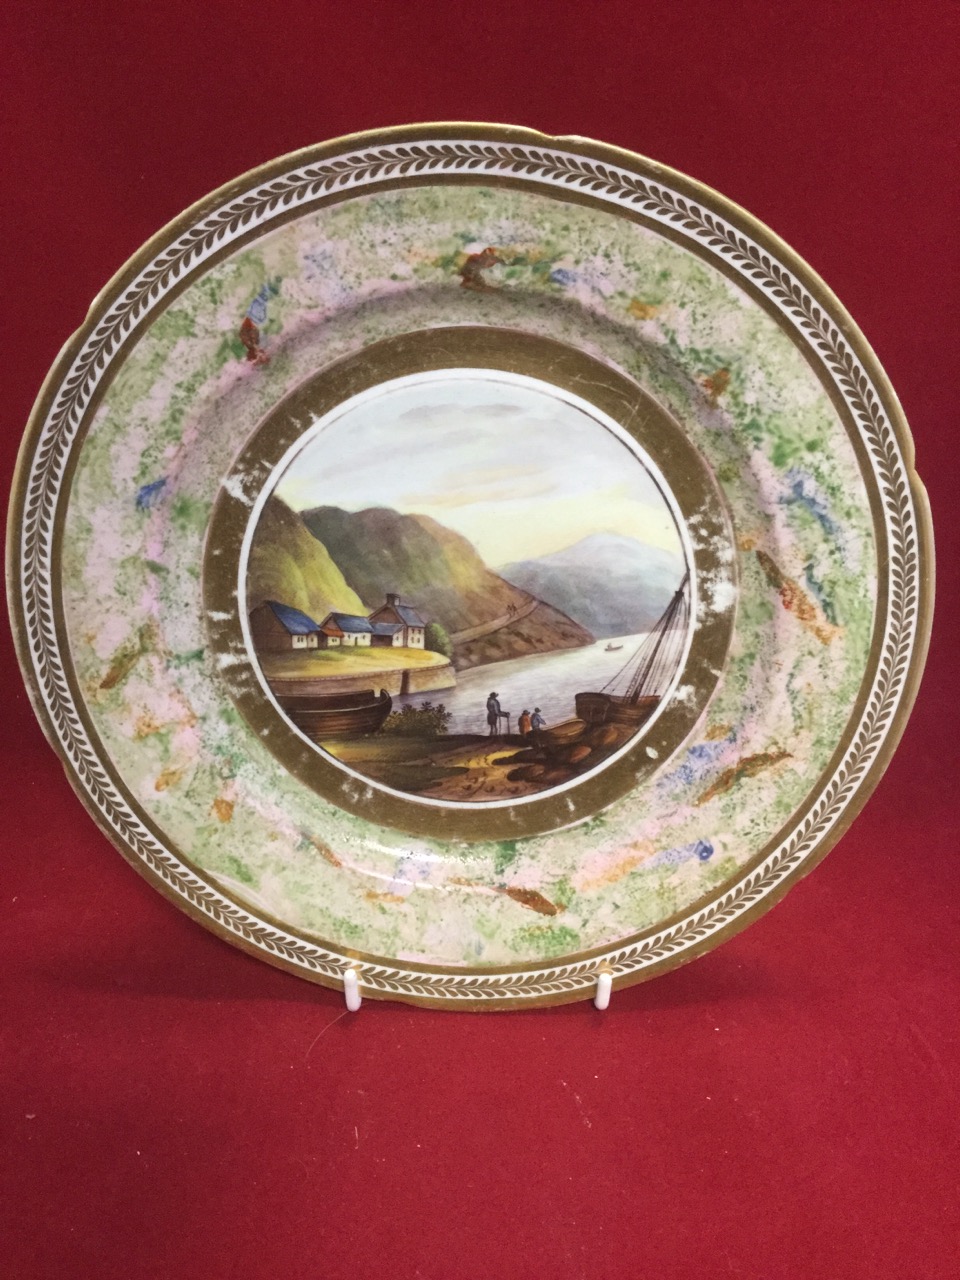 A nineteenth century Irish porcelain plate handpainted with scene of Barmouth harbour in